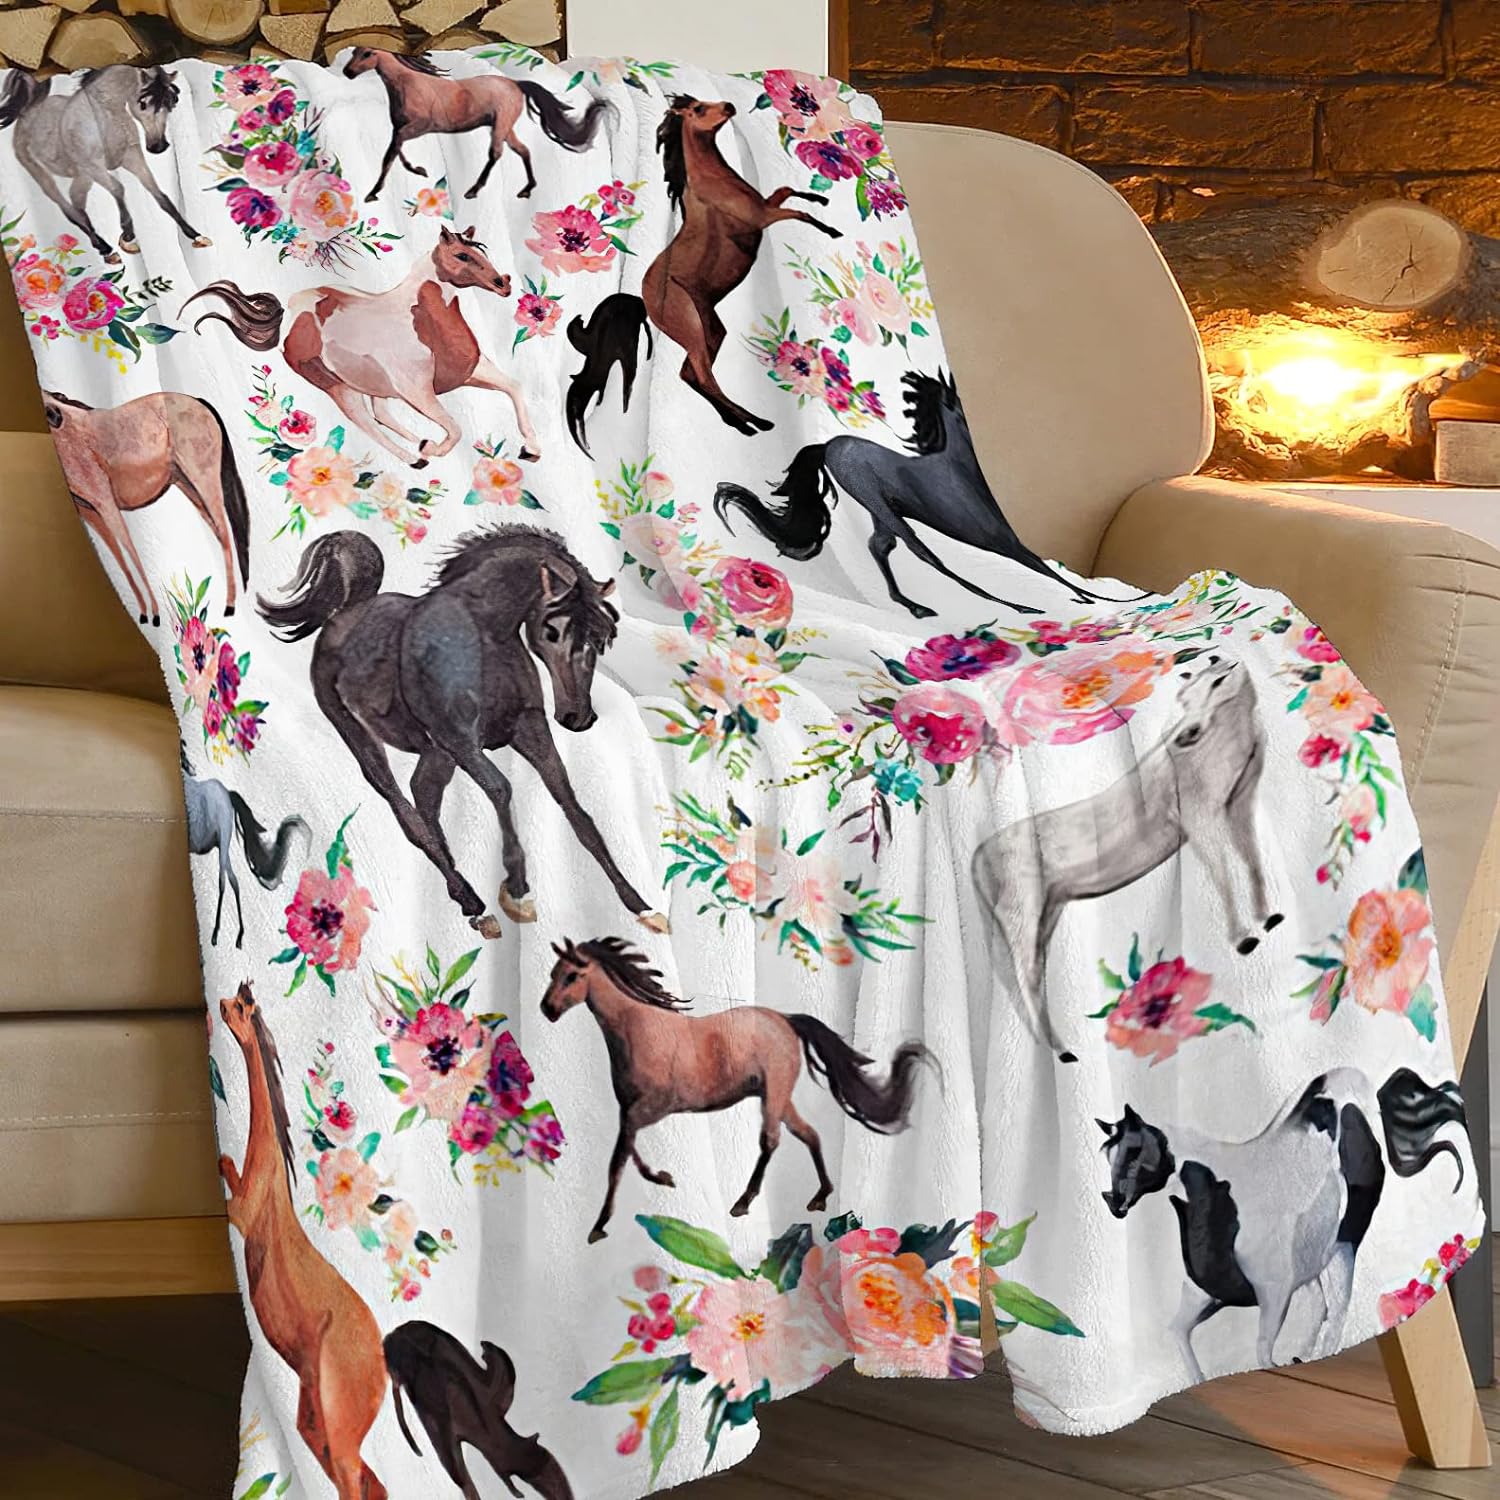 Great Choice Products Horse Blanket For Girls Beautiful Horse With Wreath Throw Blanket, Ultra Soft Warm Fleece Blanket For Couch Bedding Livi…